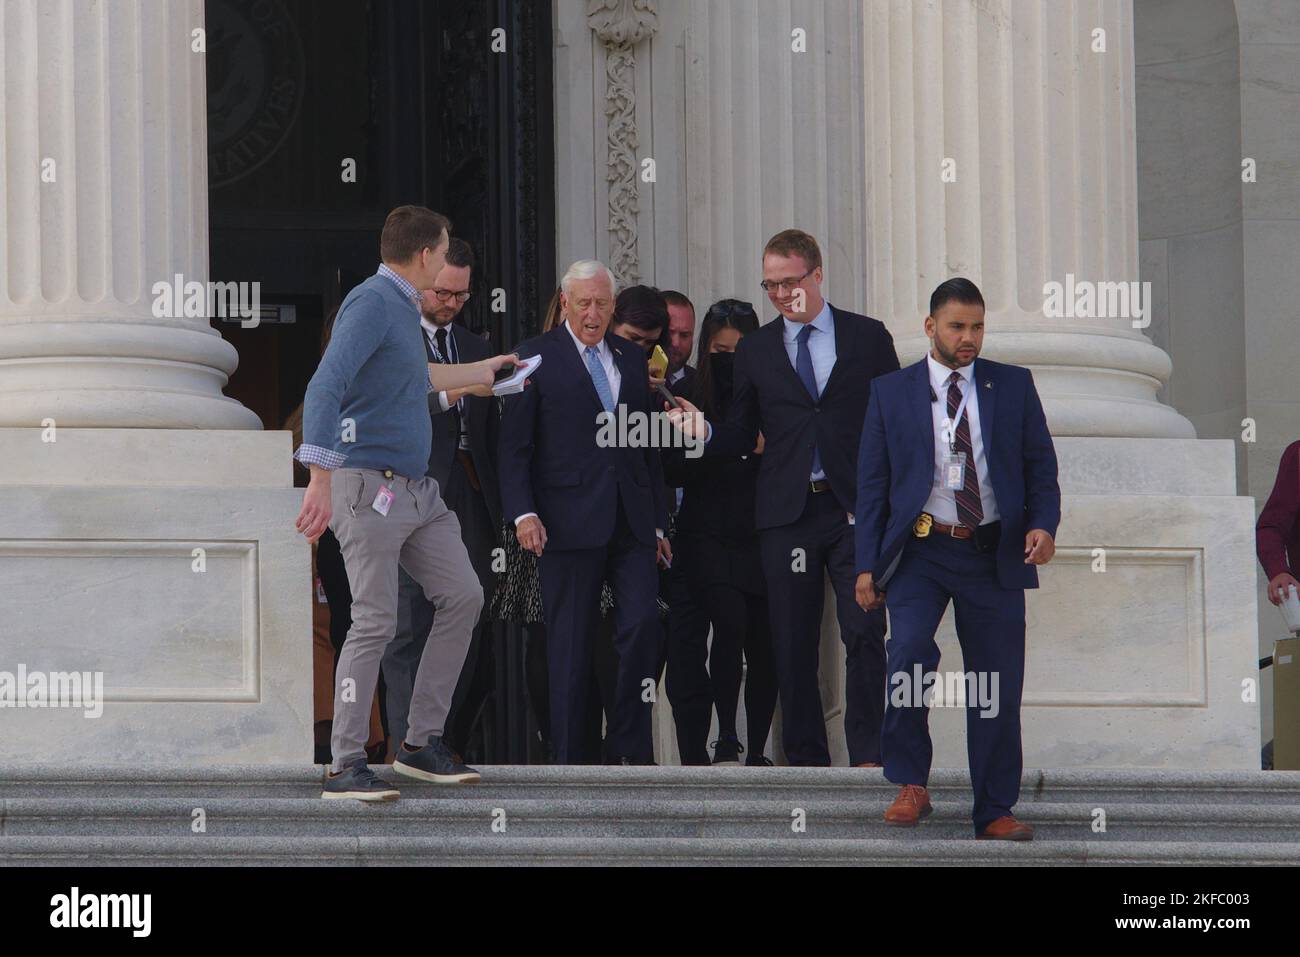 Washington DC, USA. 17 Nov 2022. U.S. Rep. Steny Hoyer (D-Md.) walks out of the Capitol surrounded by staff, security and members of the press. Hoyer, the outgoing House Majority Leader earlier announced he would step down from leadership. Credit: Philip Yabut/Alamy Live News Stock Photo